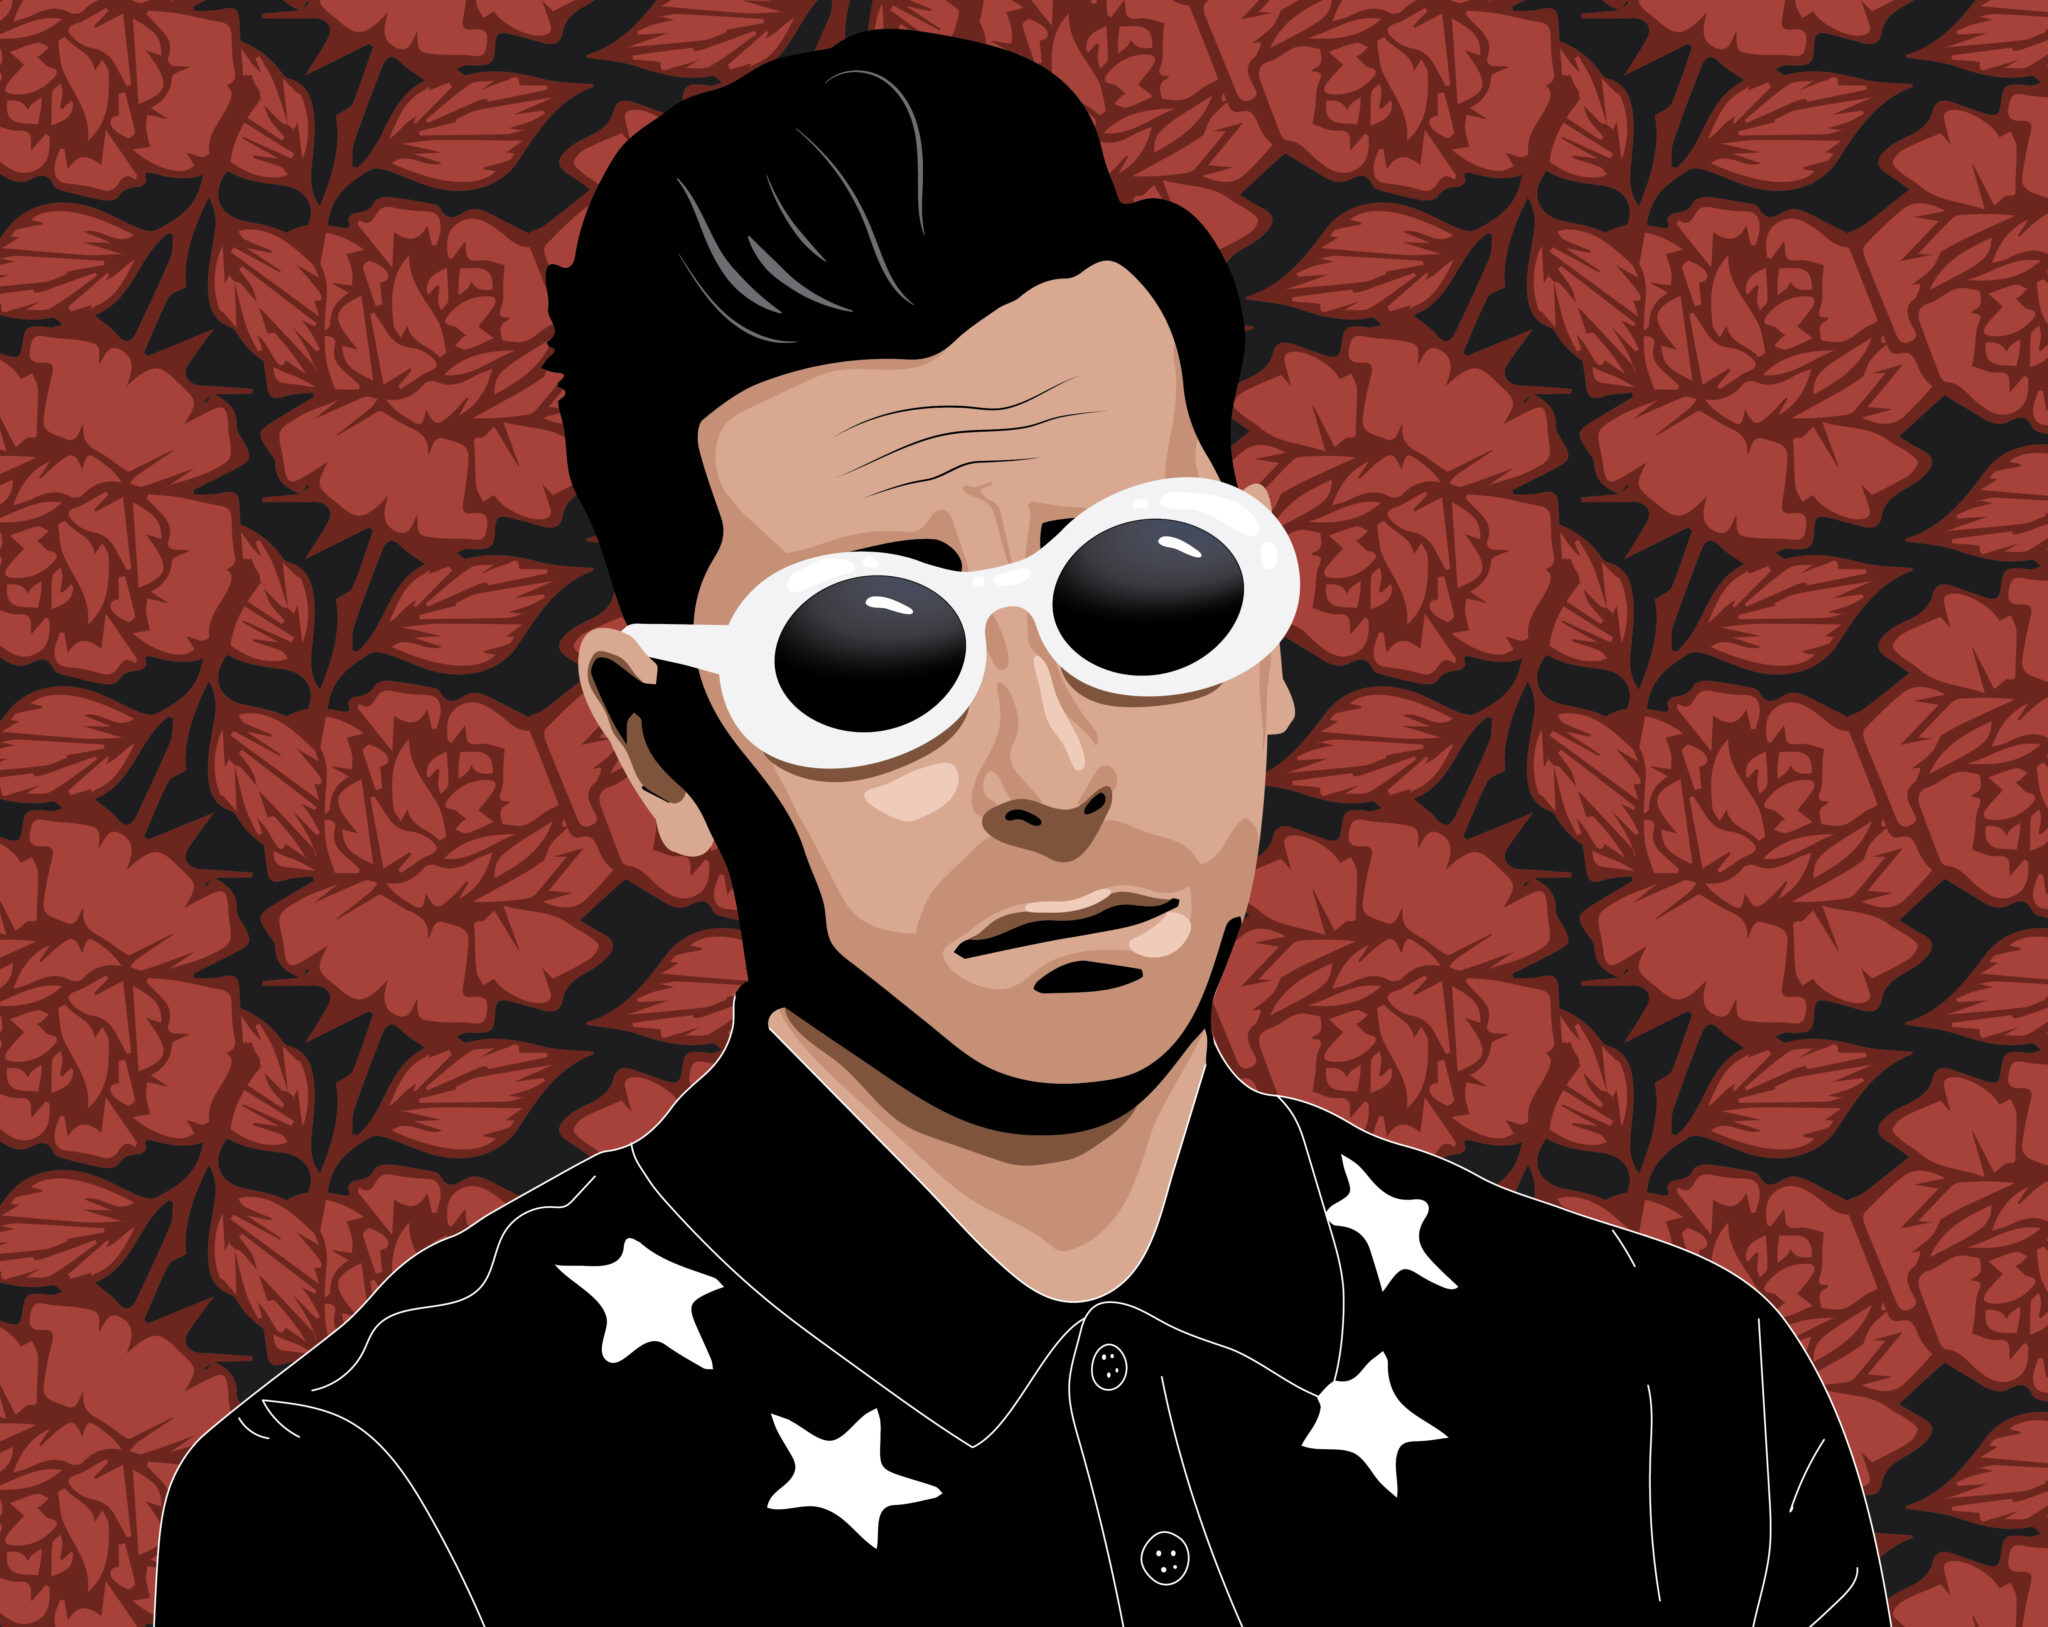 Digital illustration of David Rose from Schitt’s Creek, wearing white sunglasses and a black Givenchy polo shirt with stars at the collar.